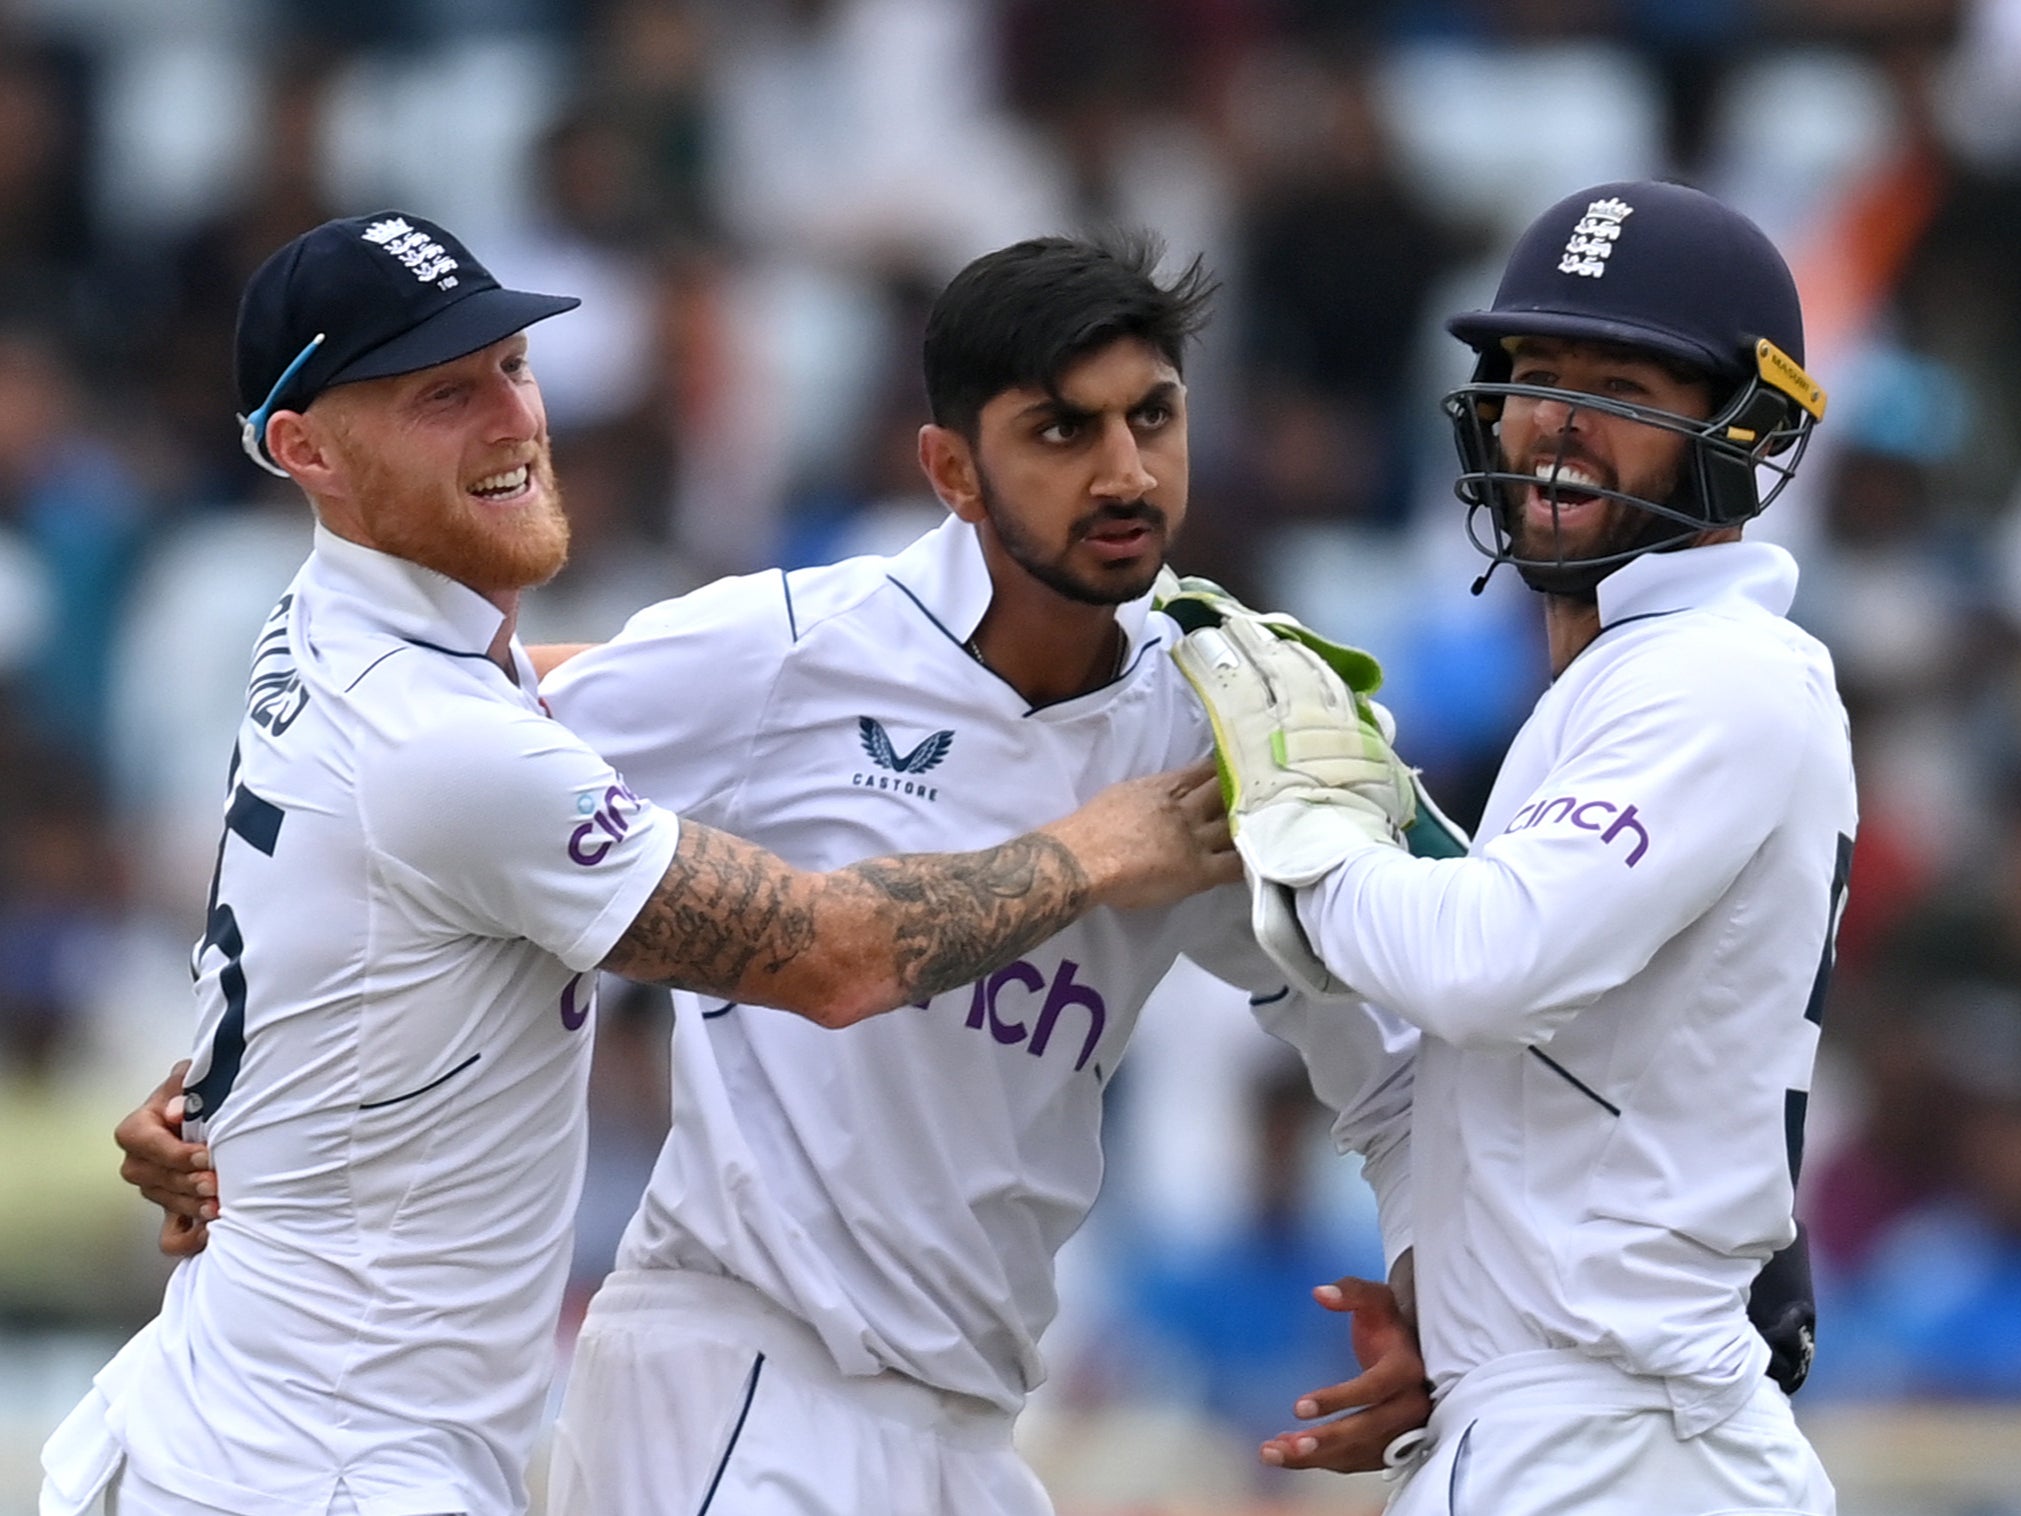 Shoaib Bashir of England celebrates with captain Ben Stokes and Ben Foakes after taking Rajat Patidar’s wicket in Ranchi